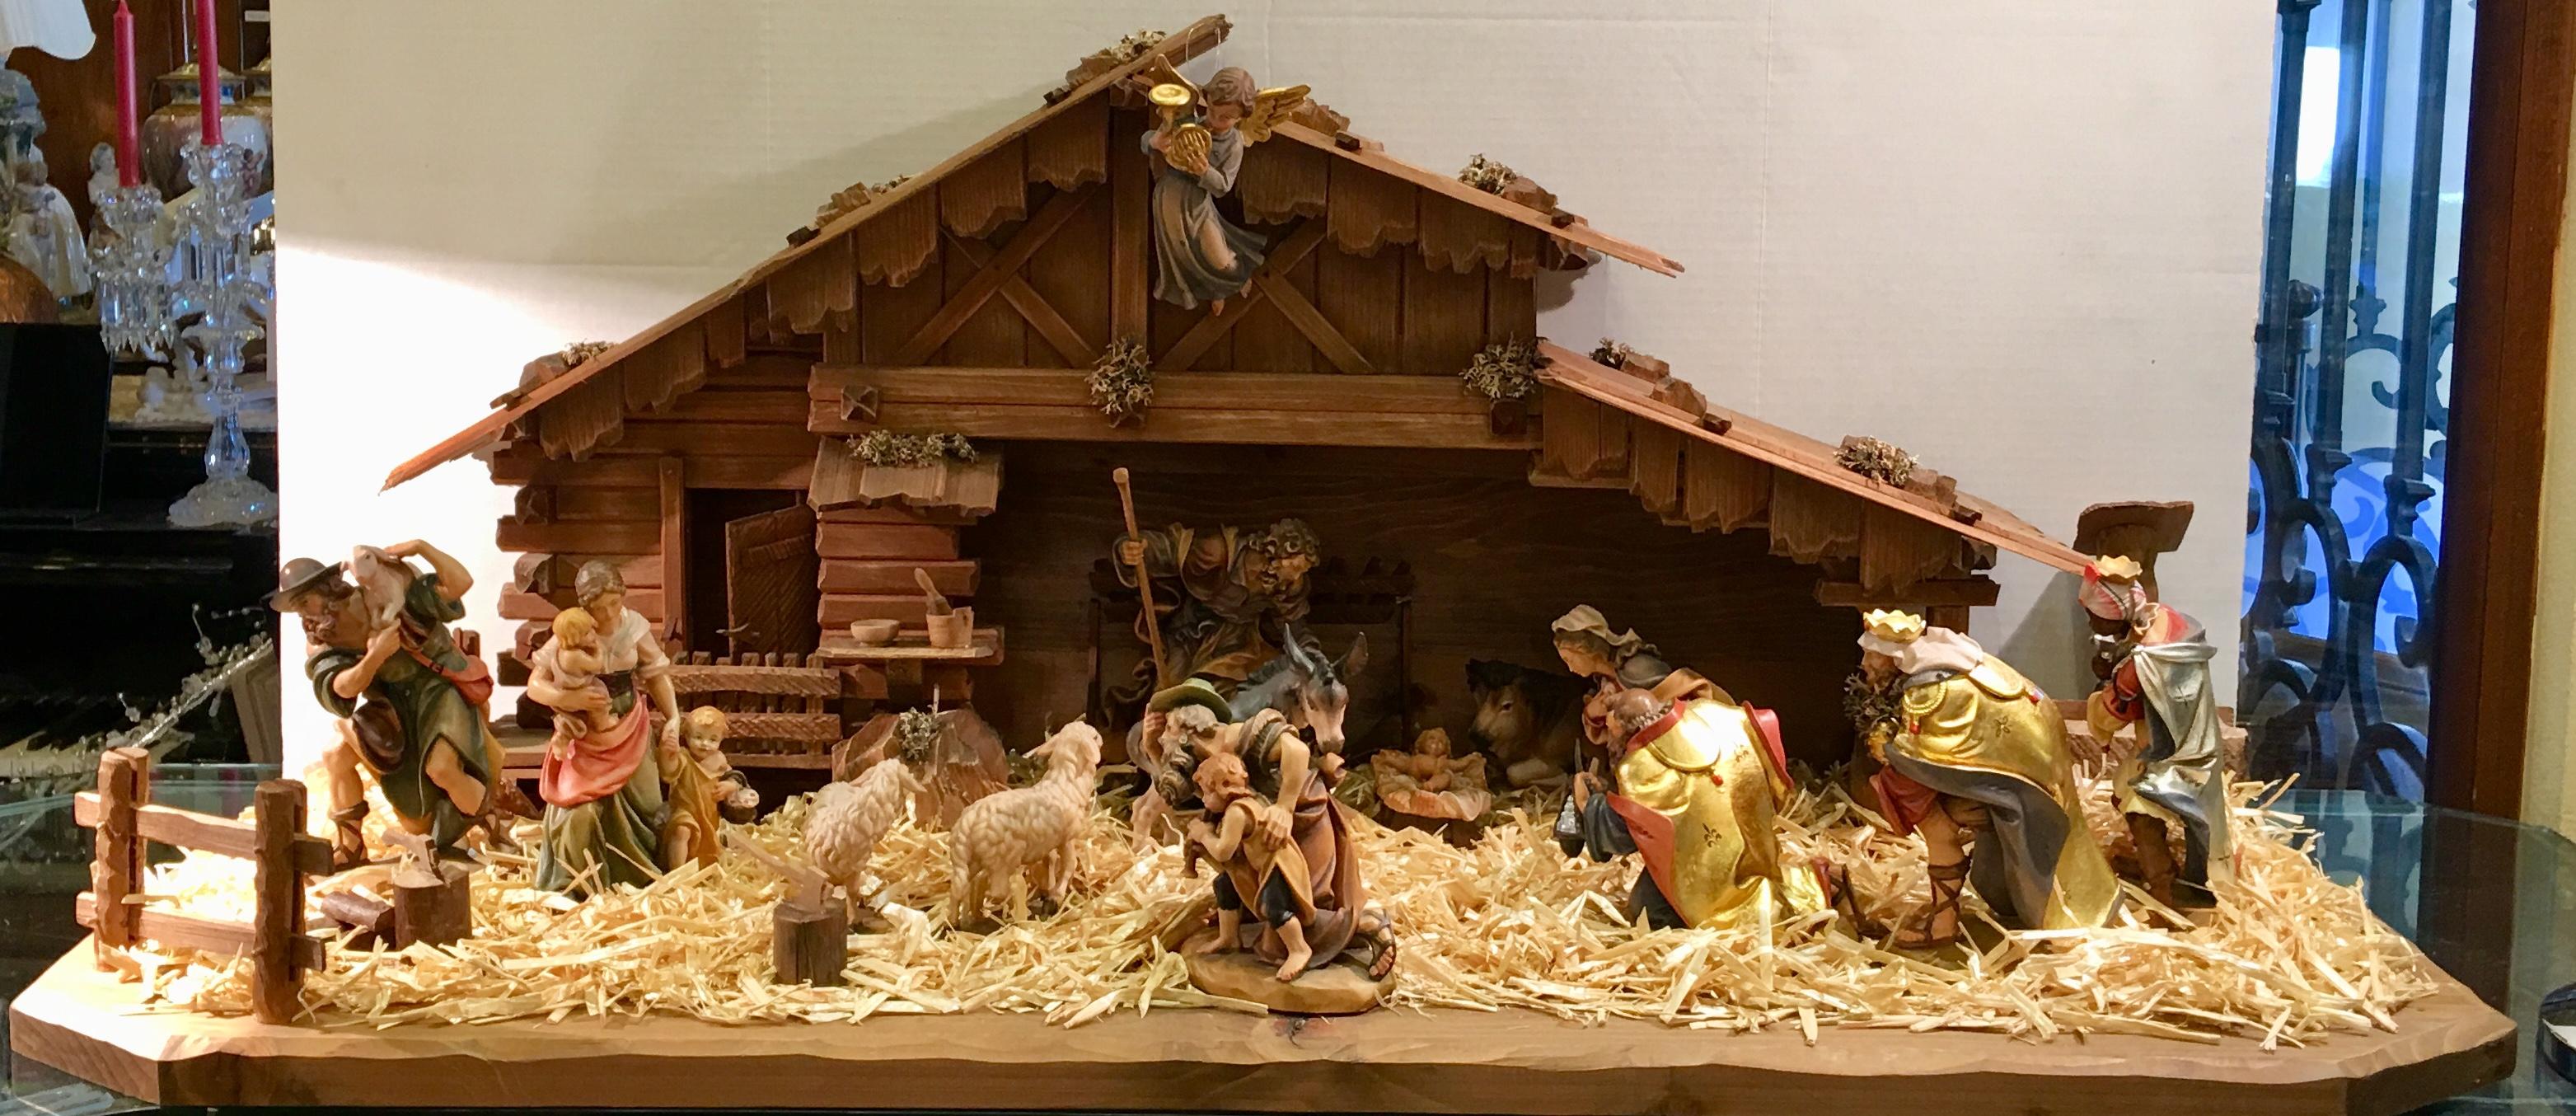 Magnificent, elaborately handmade and hand carved, hand painted, very large linden wood nativity scene from the Dementz Family DEUR Art Company in South Tyrol, Italy, is a museum quality Christmas decorating focal point. An heirloom to pass down